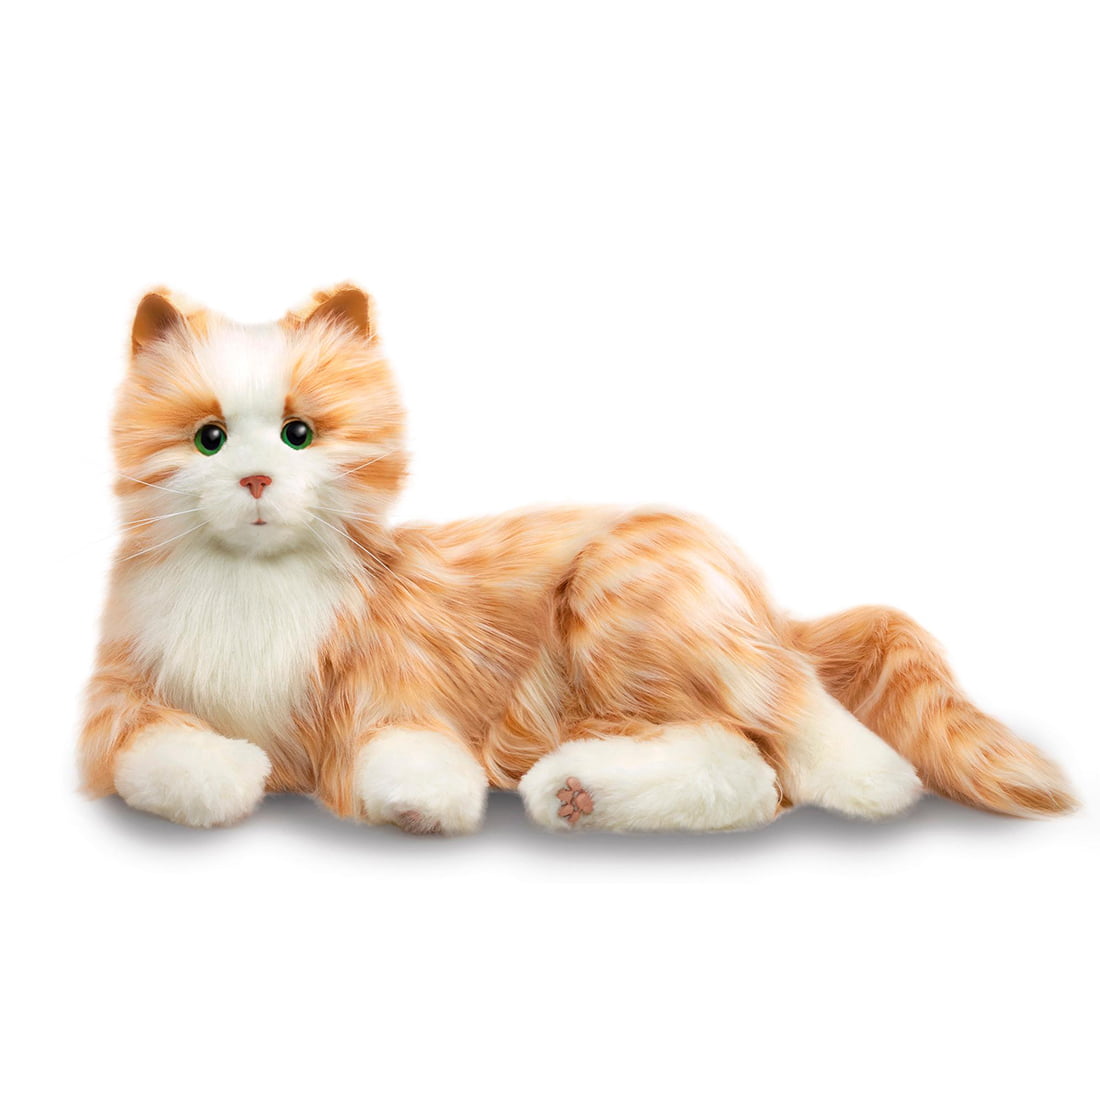 Silver with White Mitts for sale online Joy for All B7594 Companion Cat Pet 